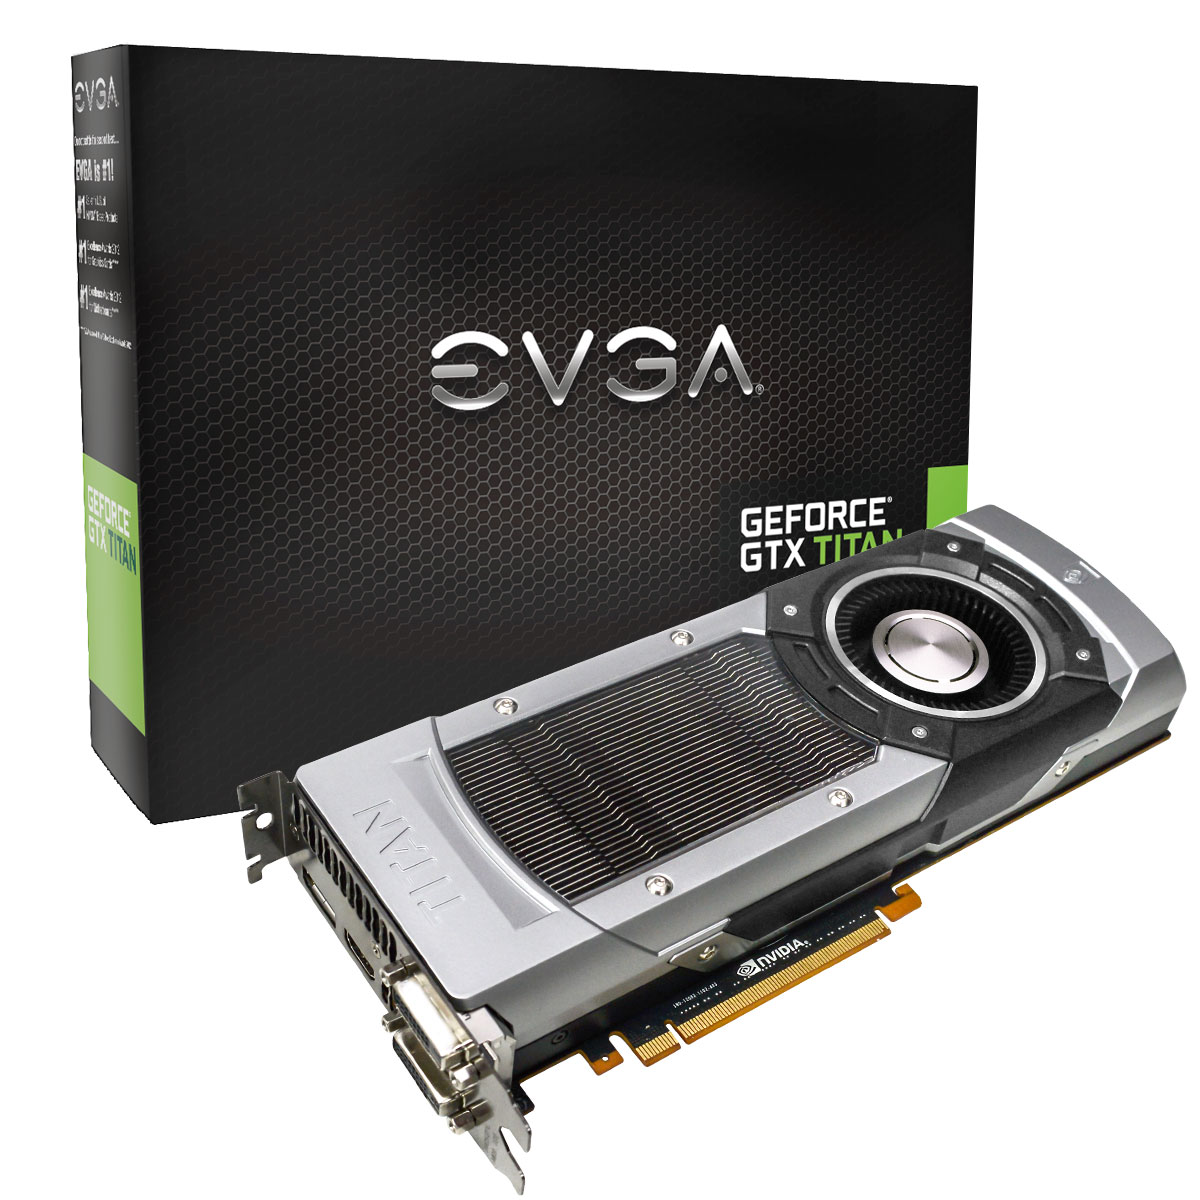 Media asset (photo, screenshot, or image in full size) related to contents posted at 3dfxzone.it | Image Name: news19011-GeForce-TITAN-EVGA_1.jpg